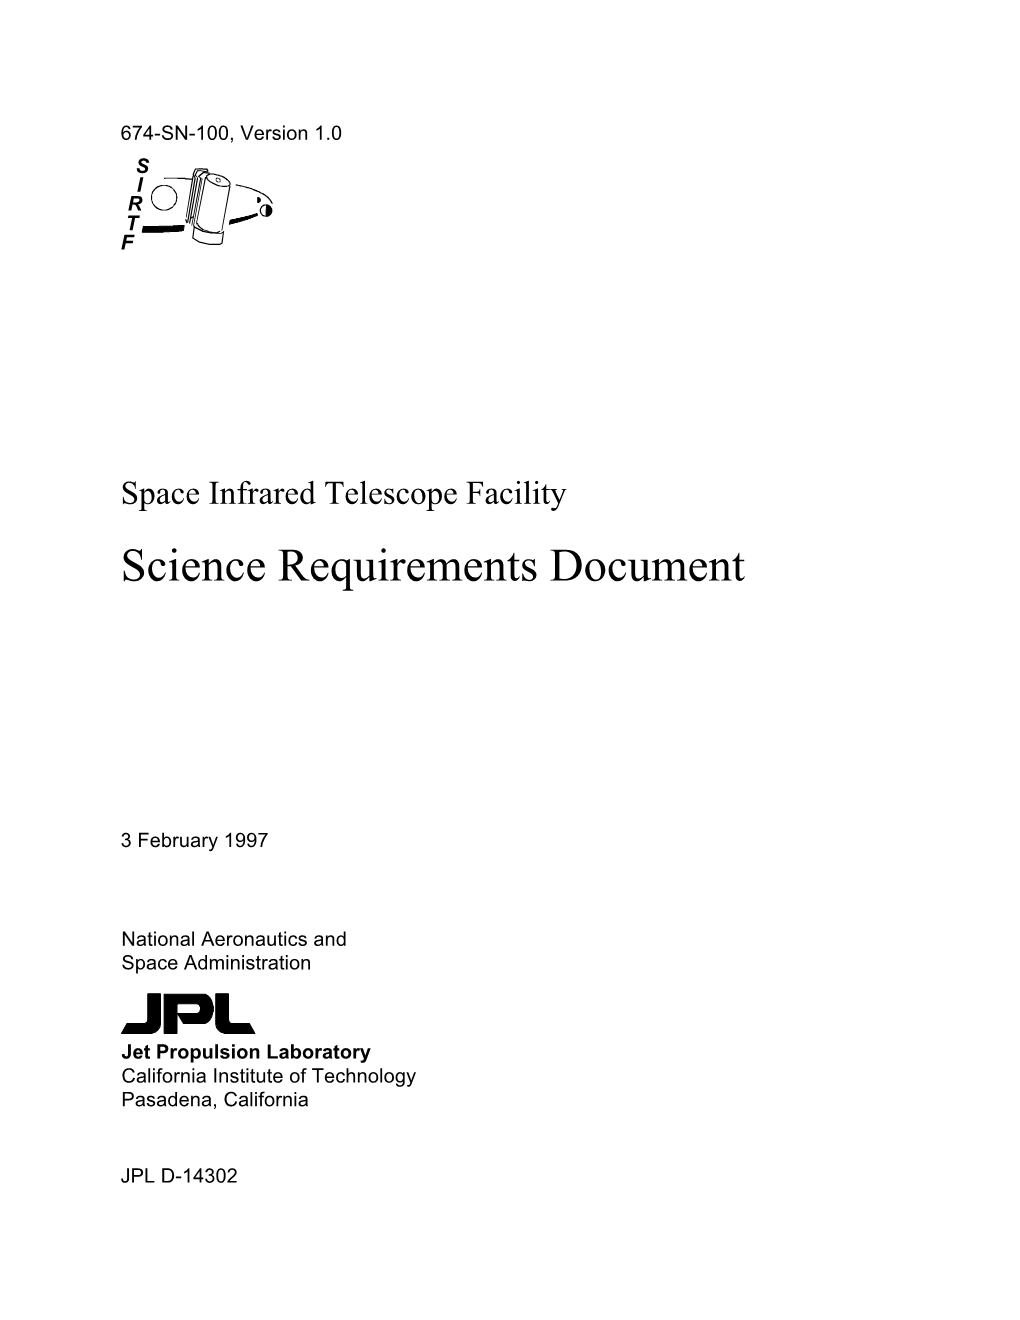 Space Infrared Telescope Facility Science Requirements Document